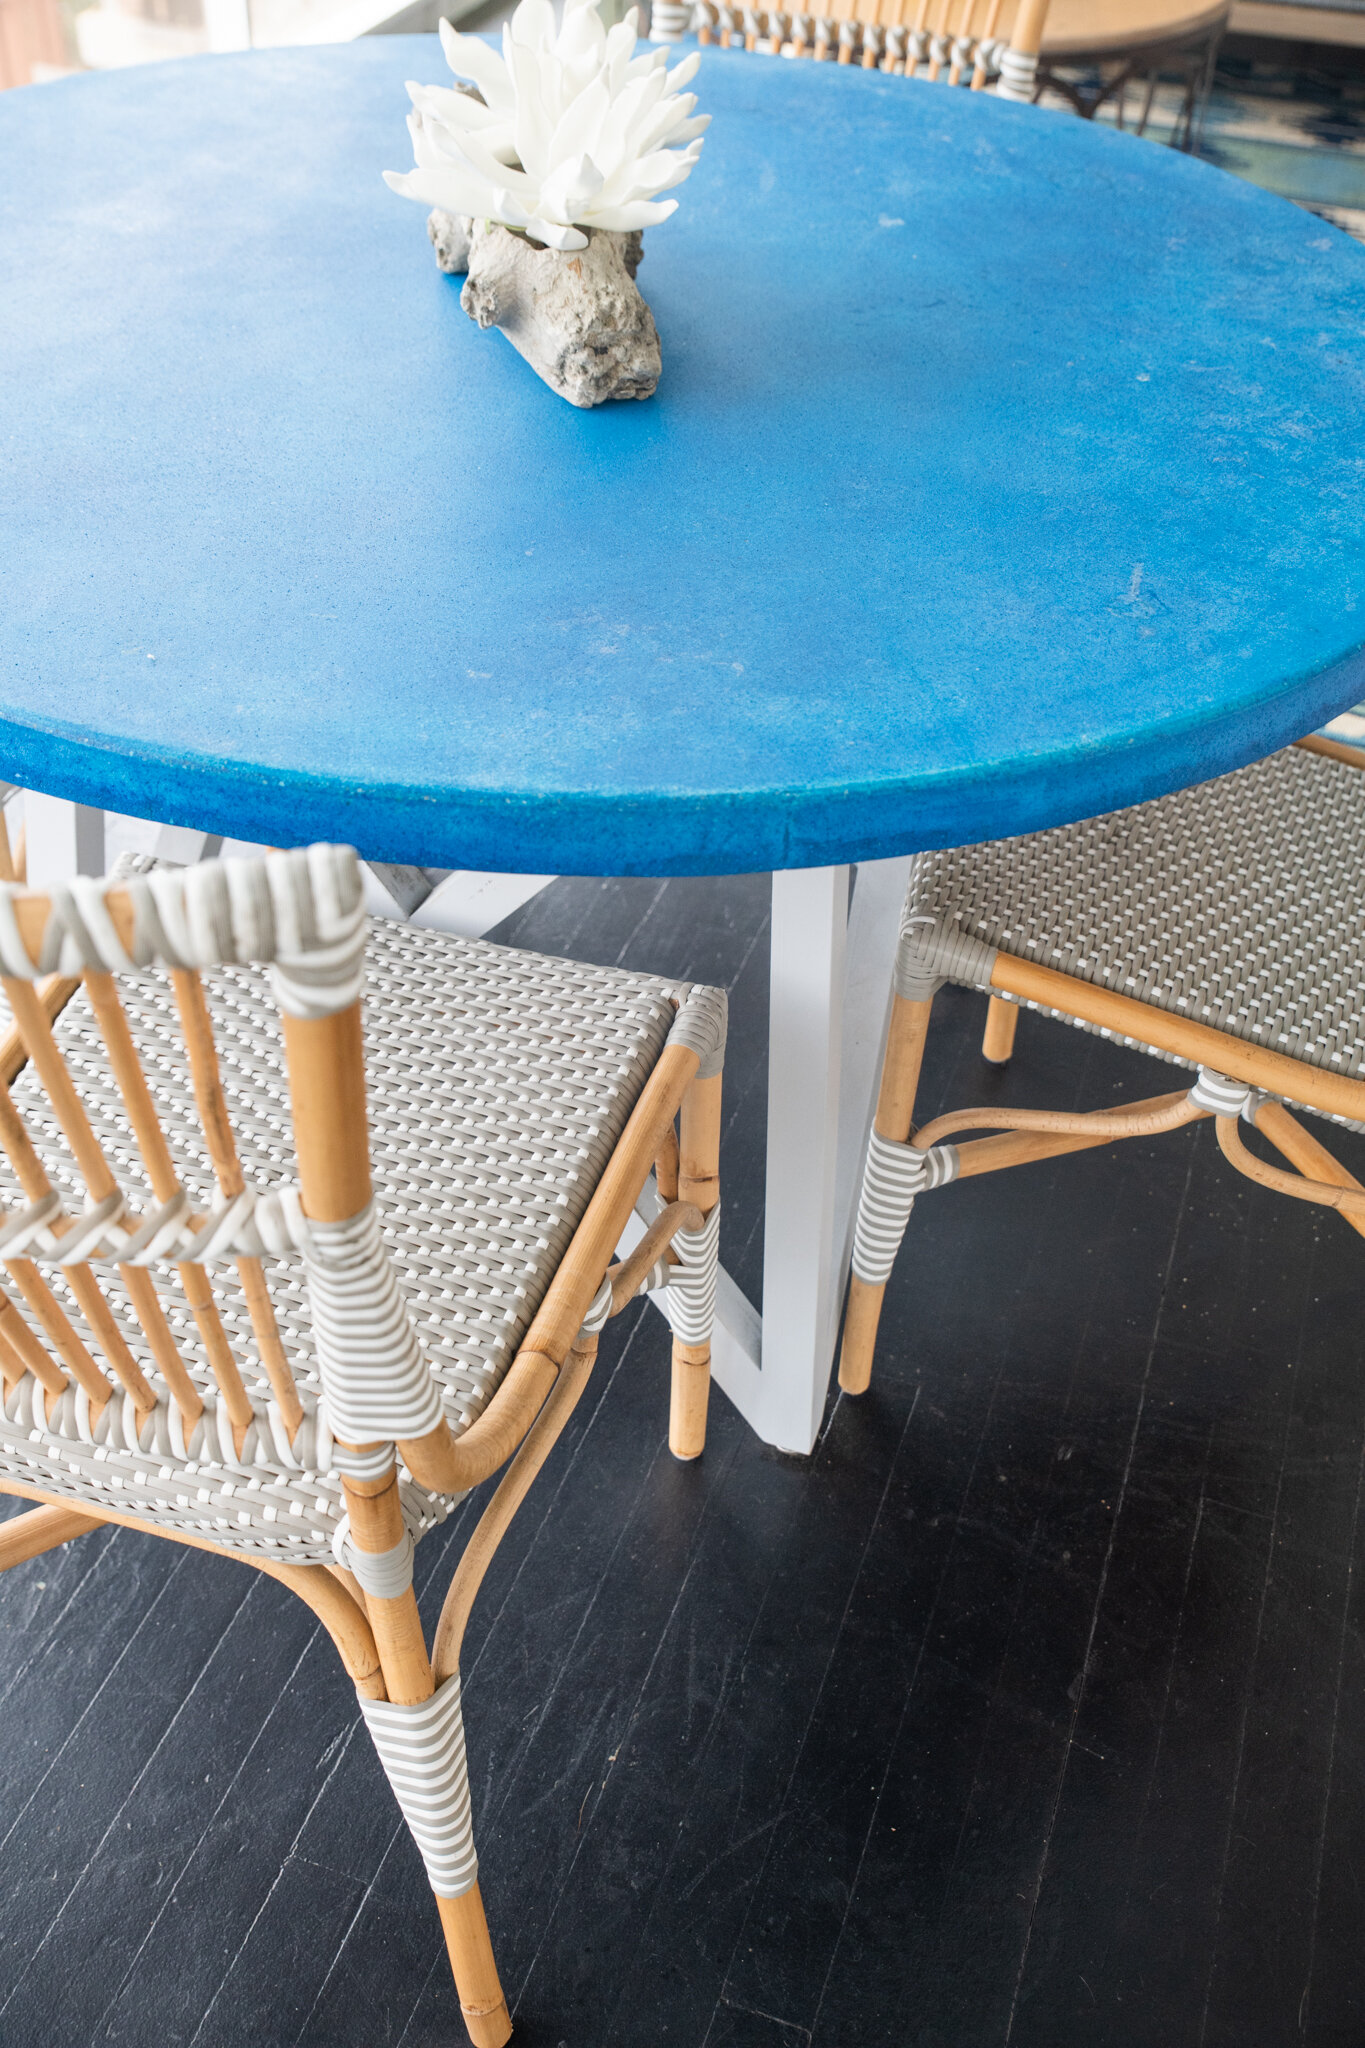 Dwell-Chic-Colorful-Coastal-Porch-Blue-Table-And-Bamboo-Chair-Details.jpg